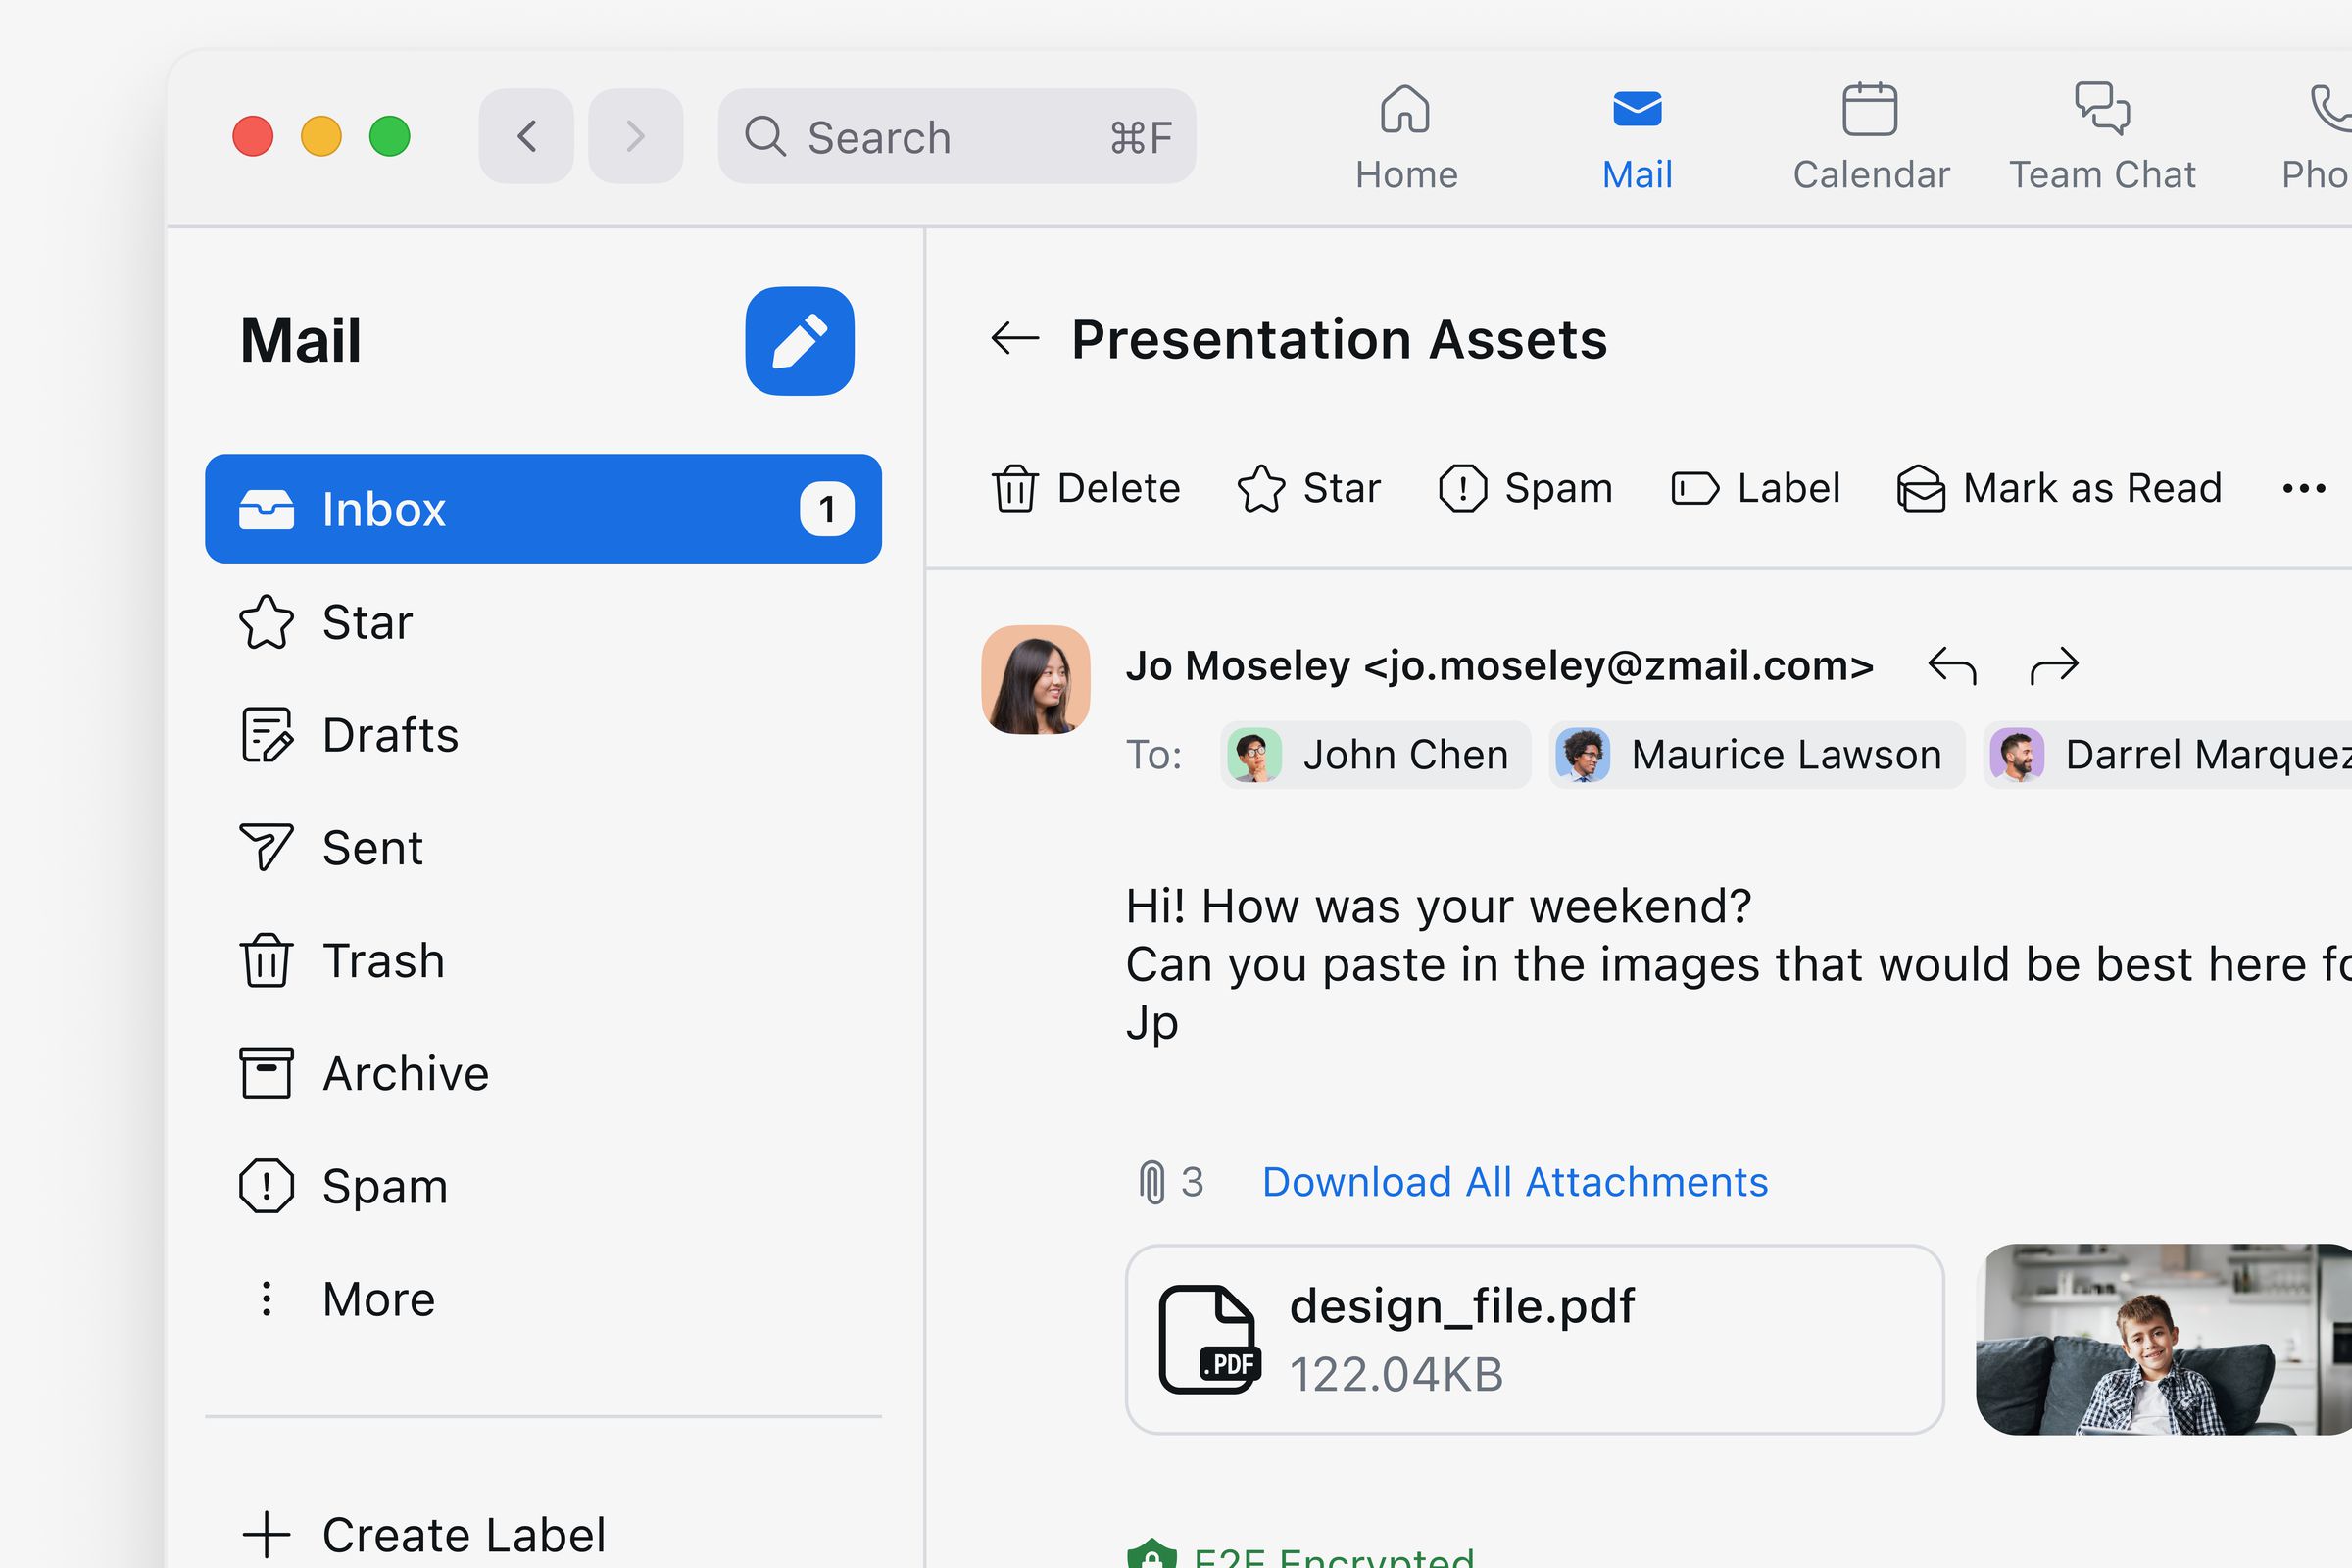 Zoom mail application is built into Zoom One, there’s tabs on top for Mail, Calendar, Meetings, Team Chat, and more. The side bar has Inbox, drafts, and more email app folders, and the main body is an email thread.